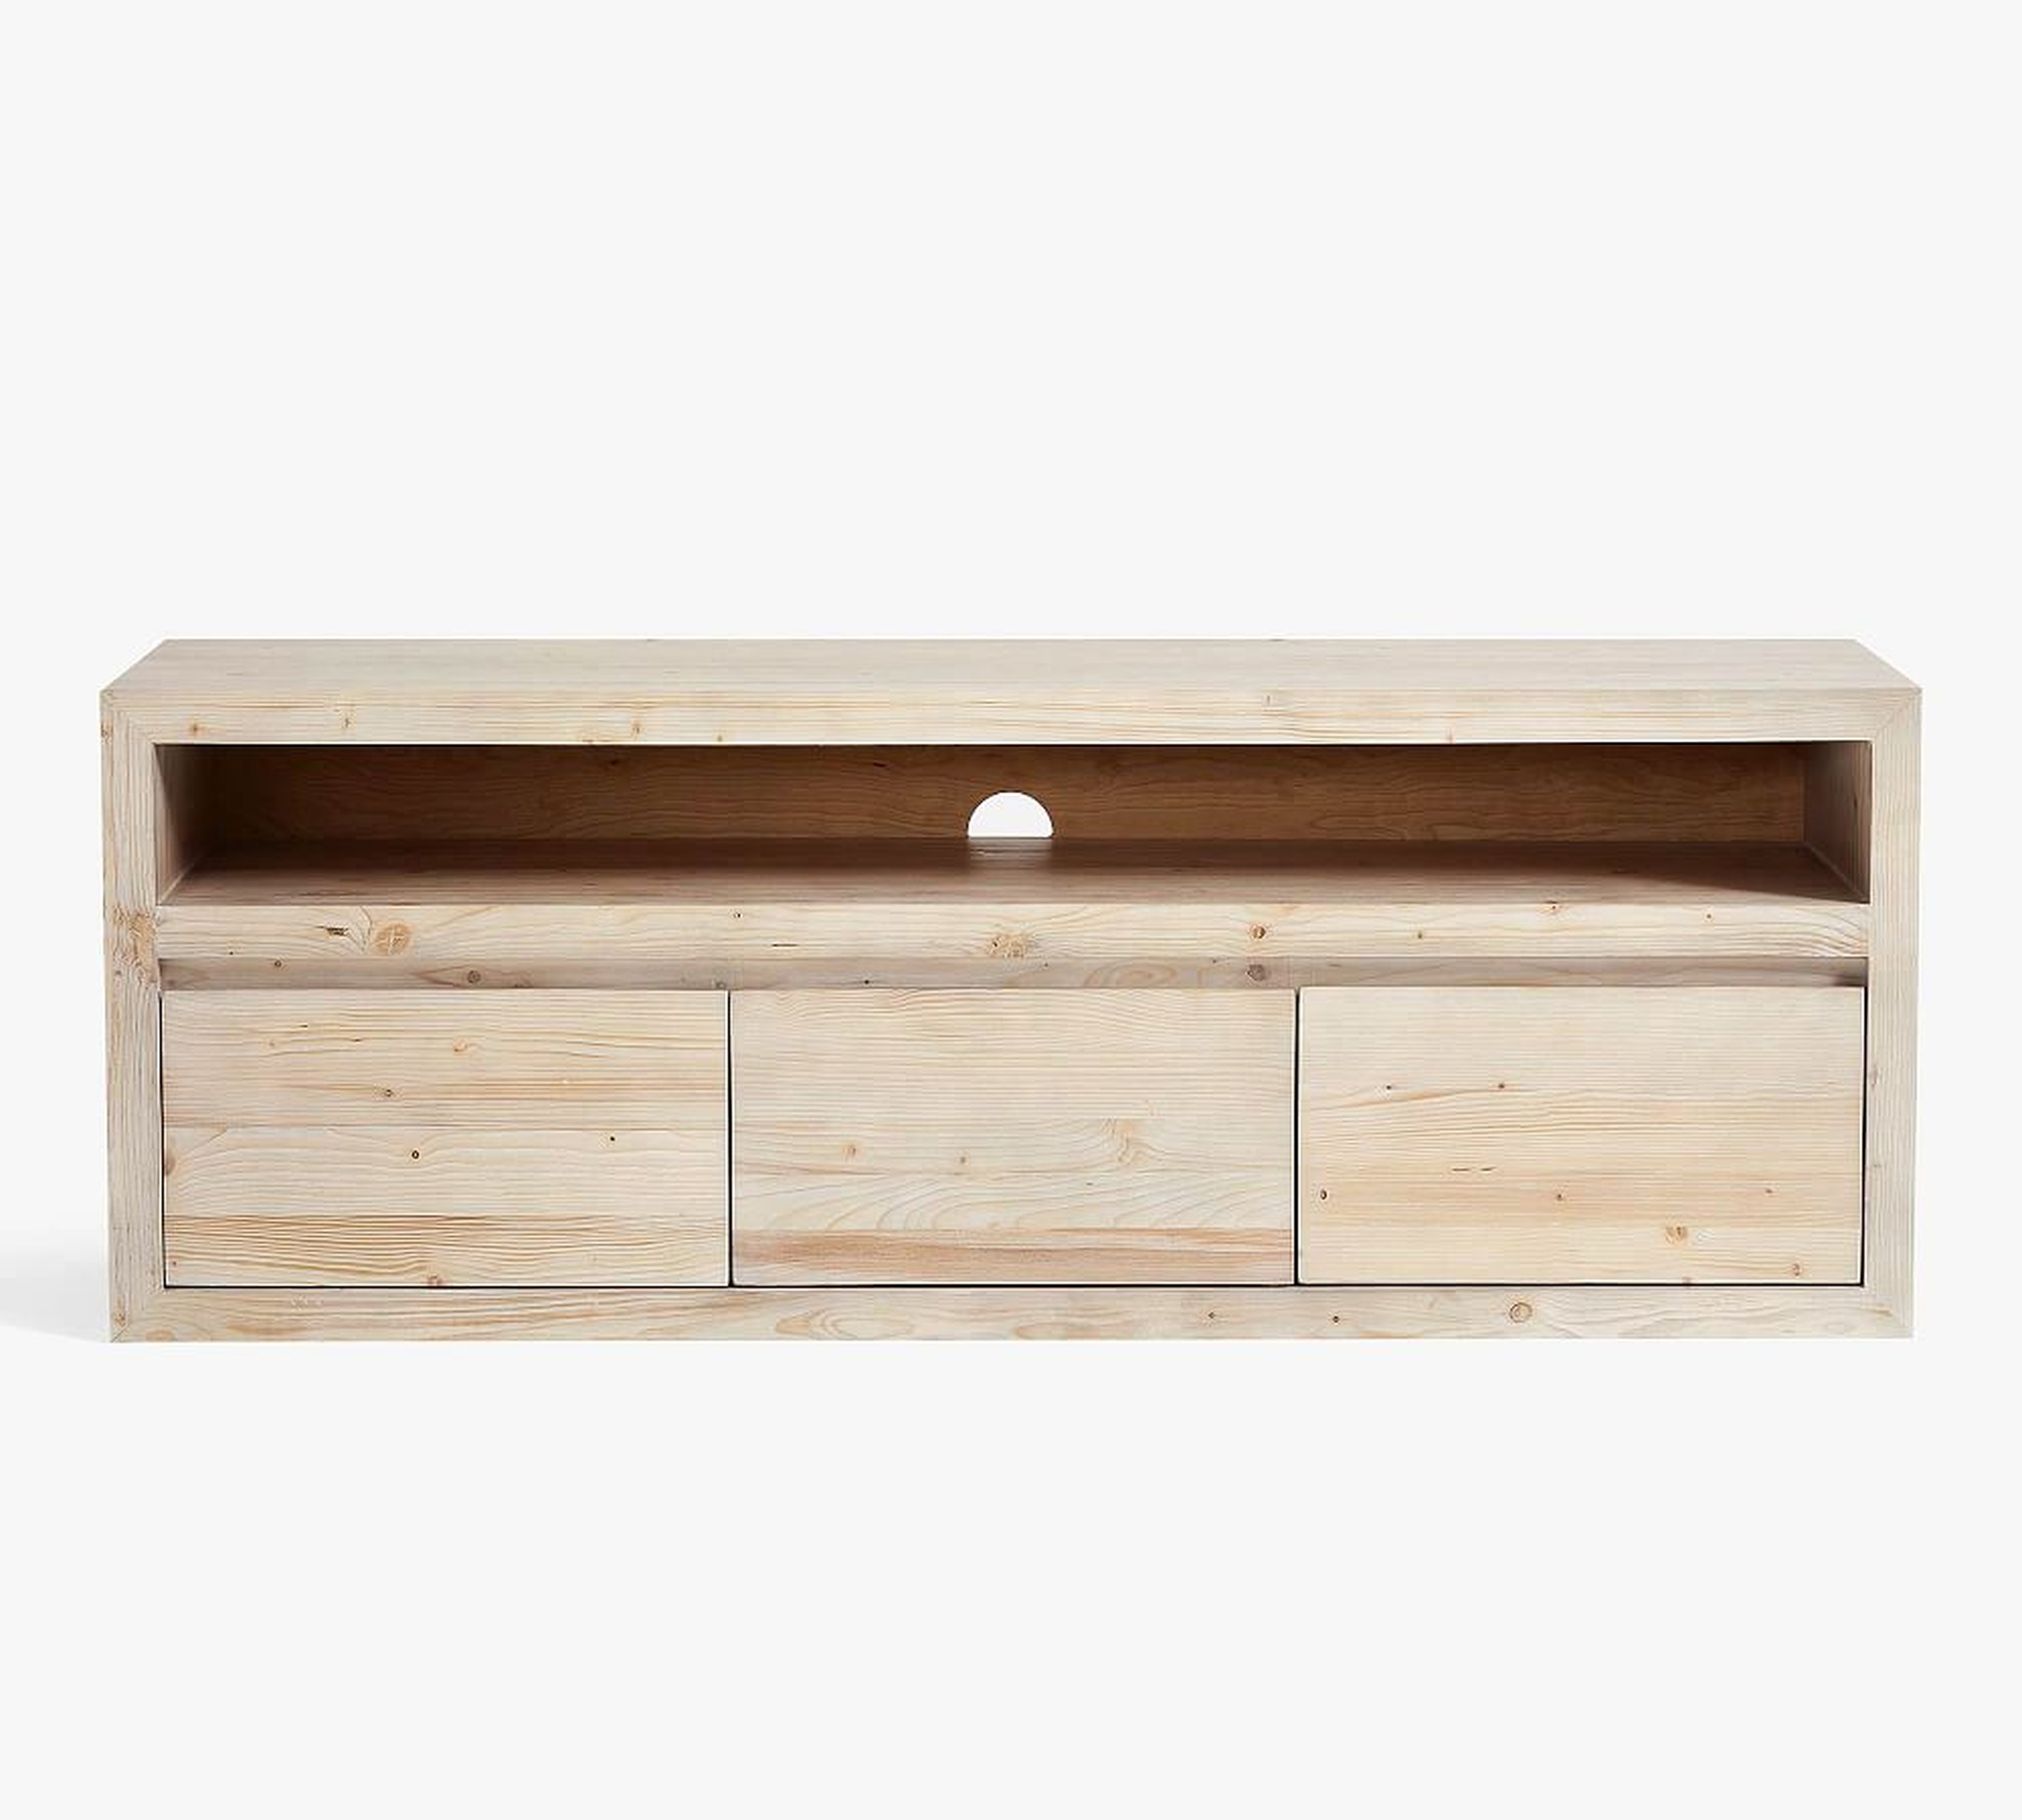 Folsom 66" Media Console with Drawers, Desert Pine - Pottery Barn